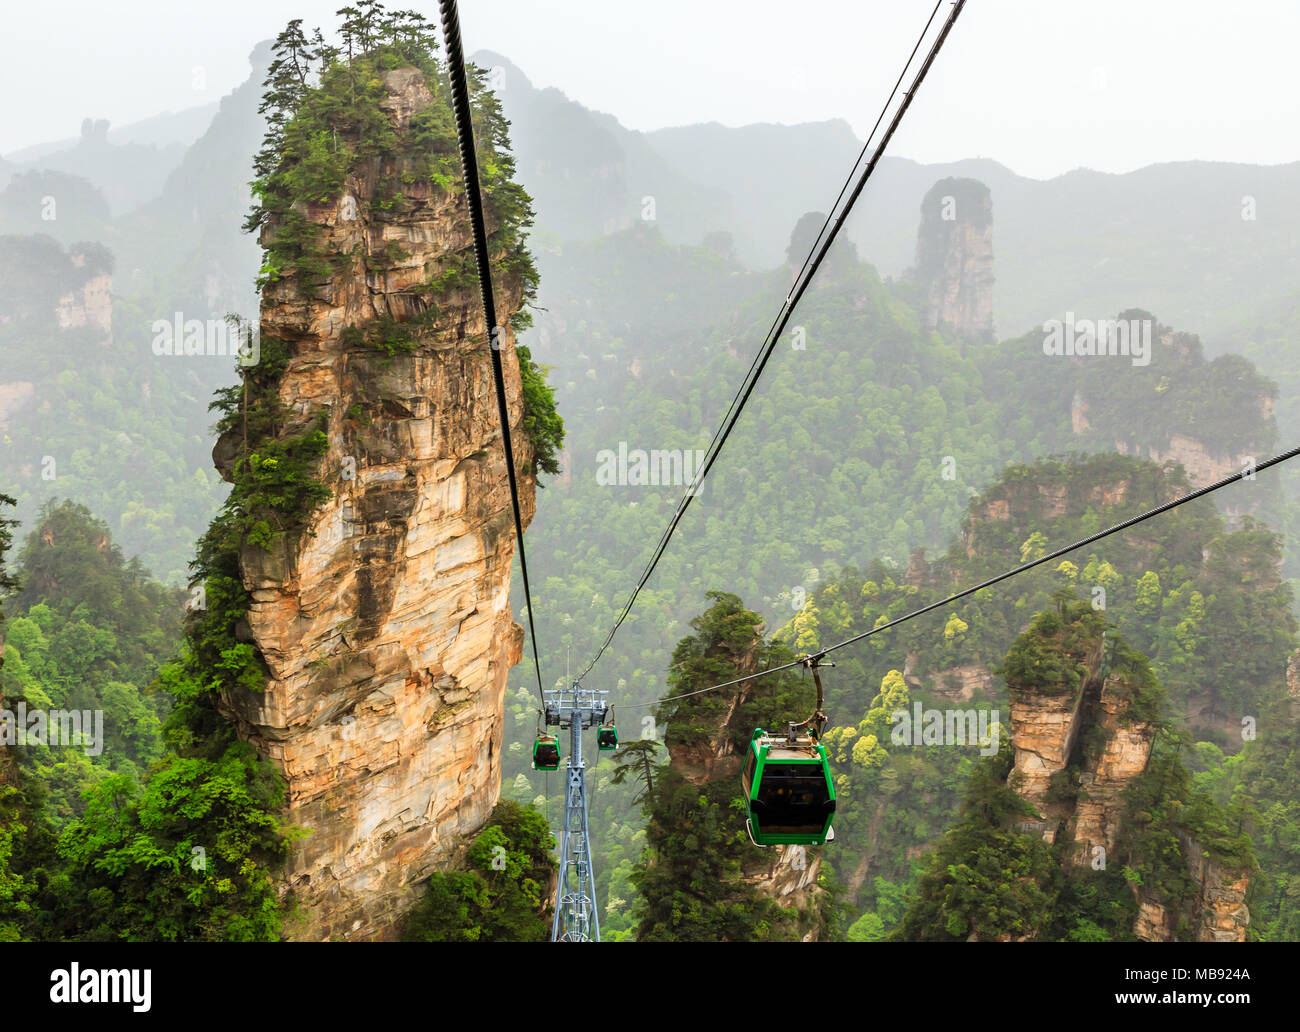 Cablecars on its way to the top among sandstone pillars and peaks with green trees and mountains panorama, Zhangjiajie national forest park, Hunan pro Stock Photo